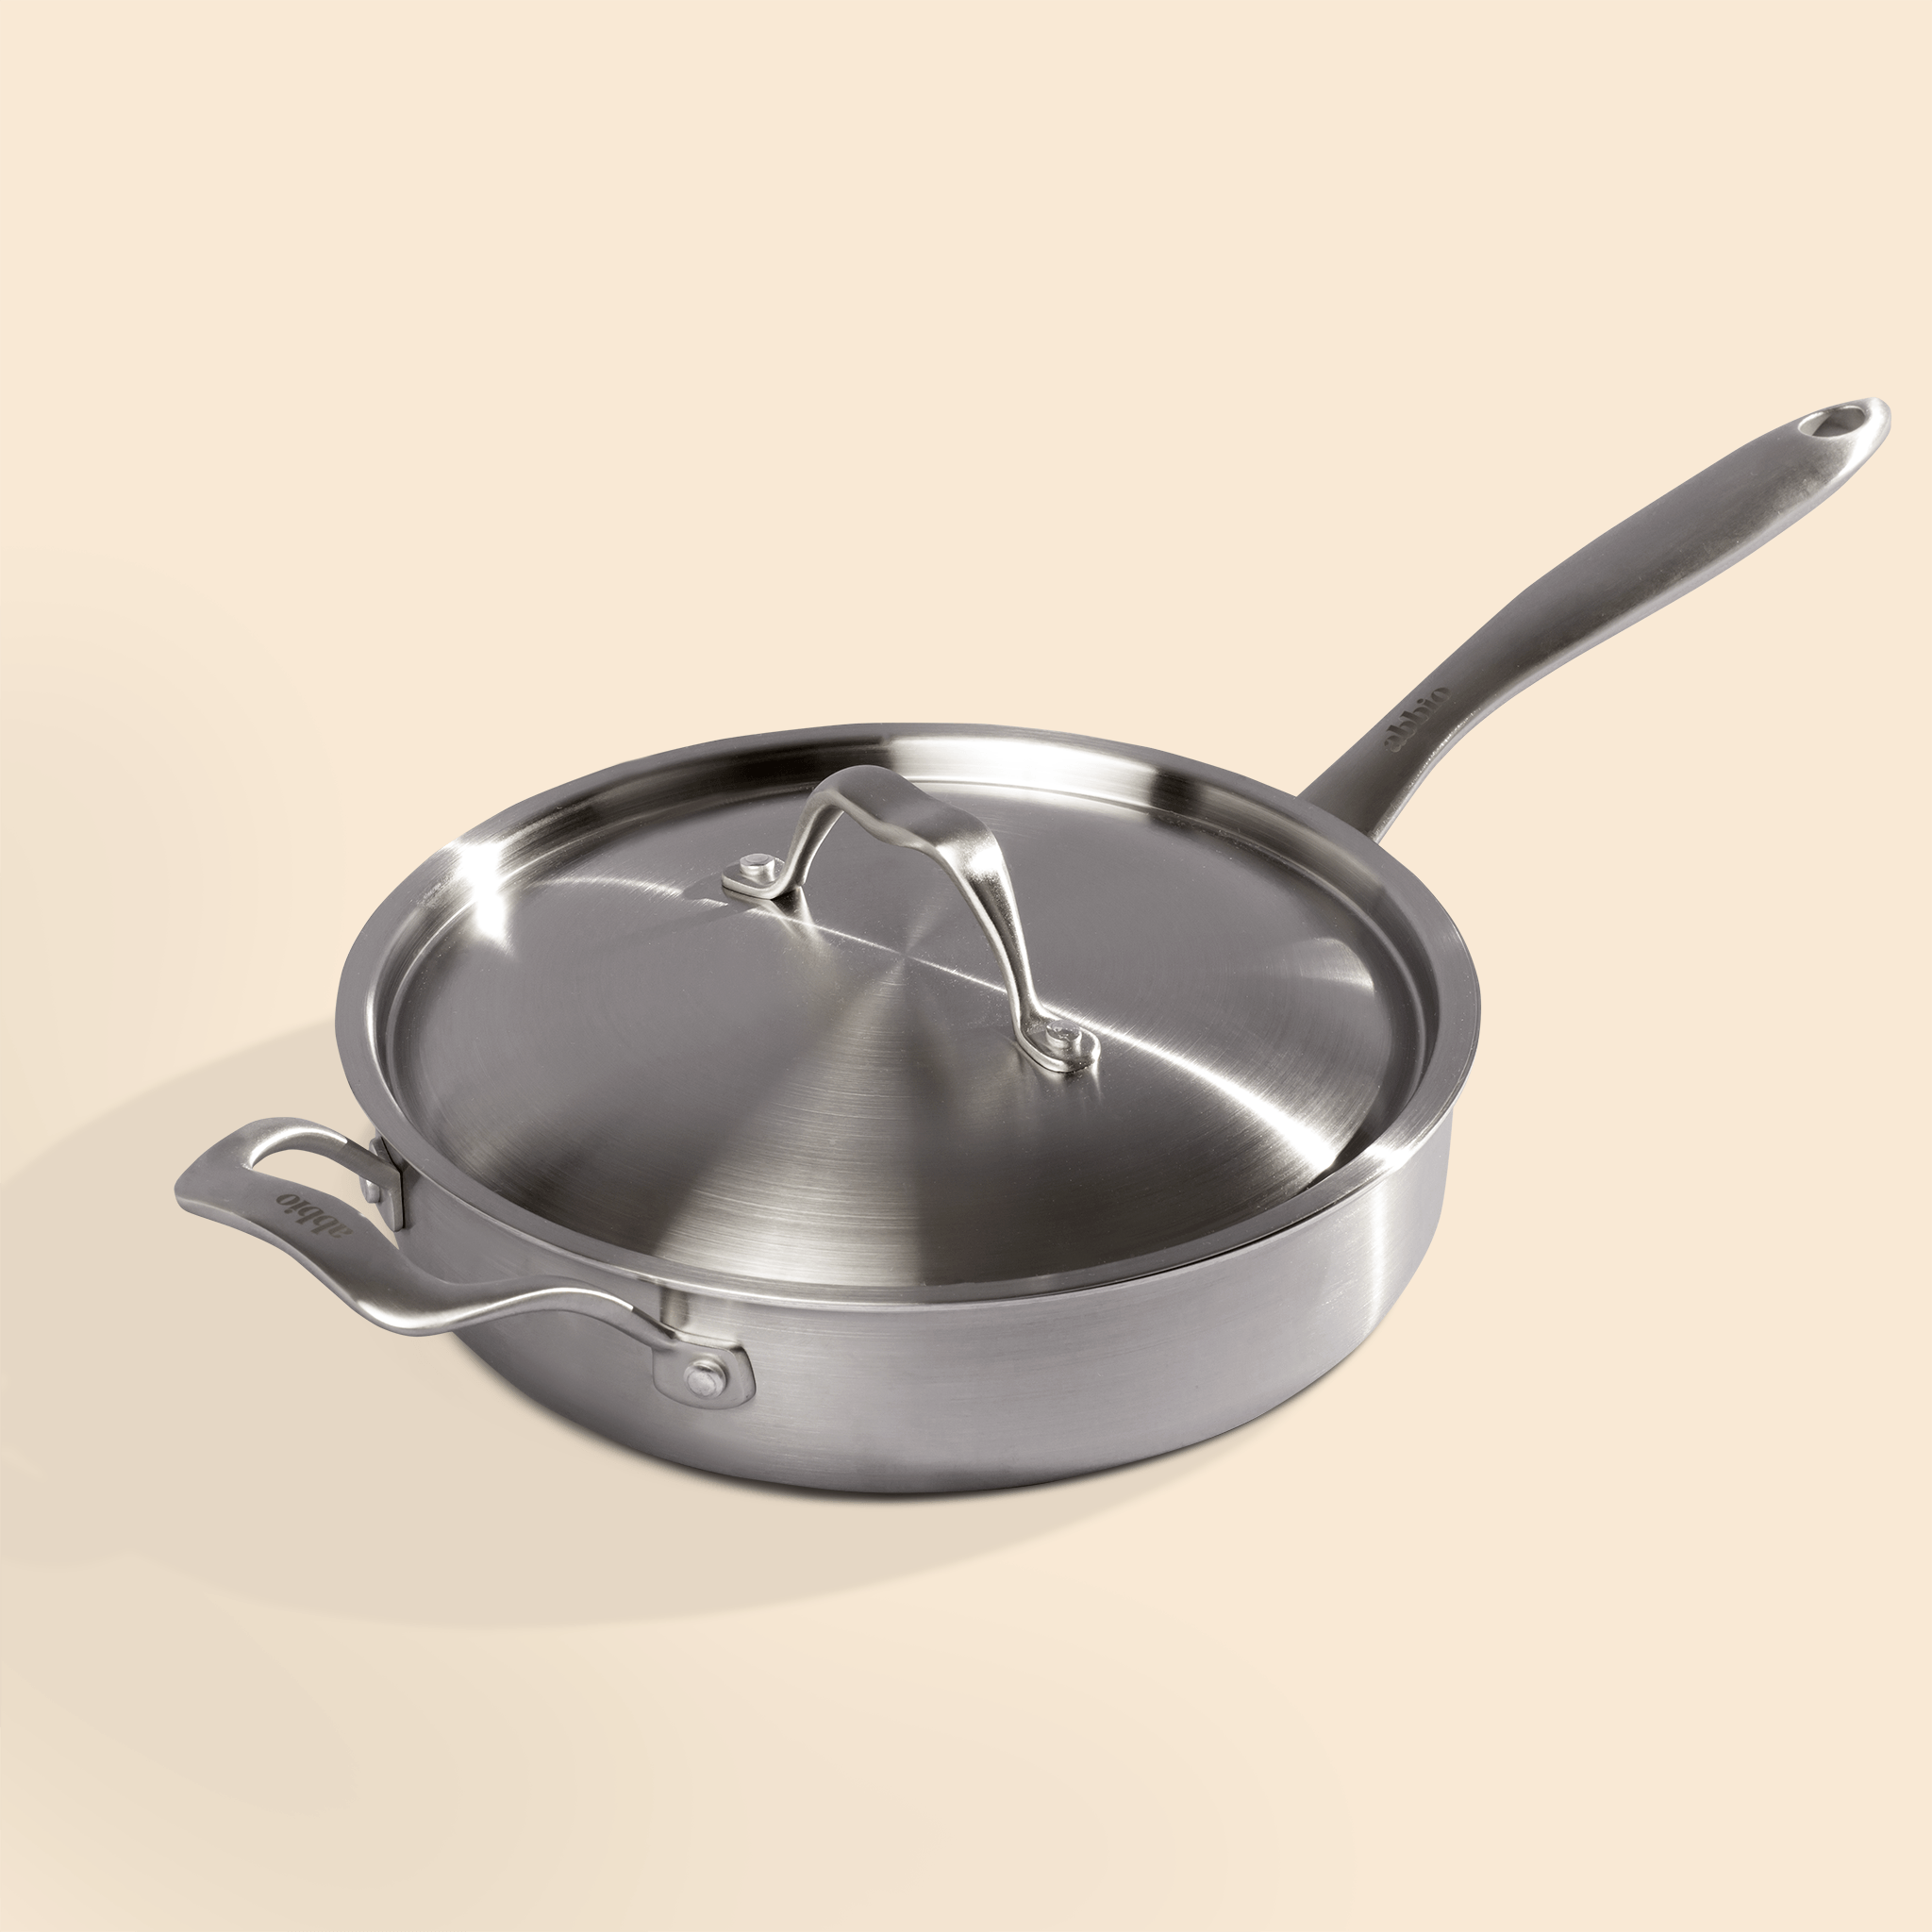 What is a Sauteuse Pan?